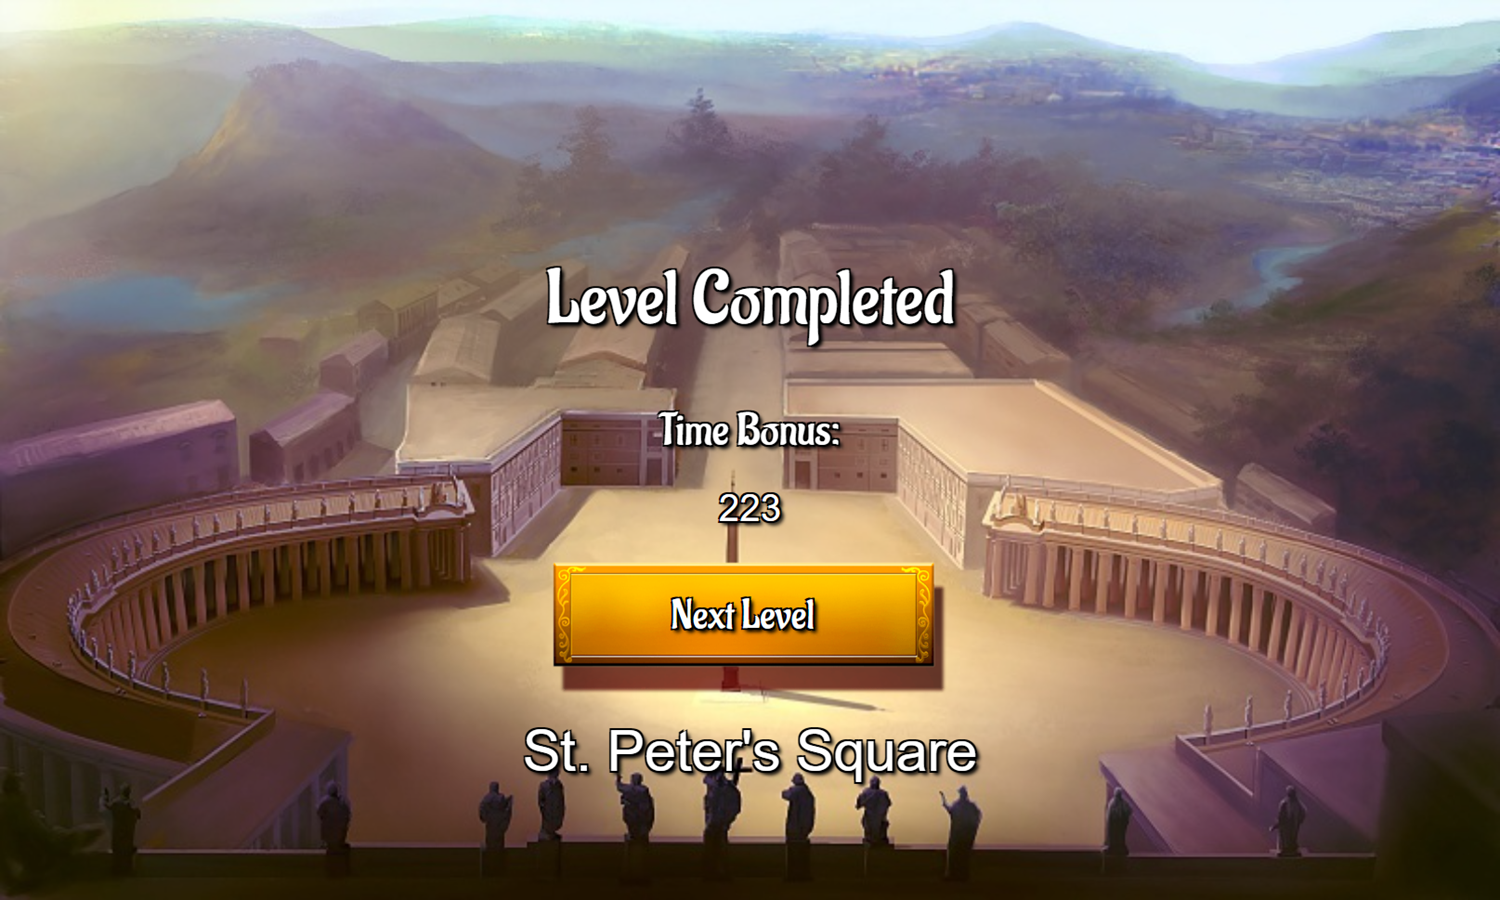 Discover Ancient Rome Game Level Completed Screenshot.